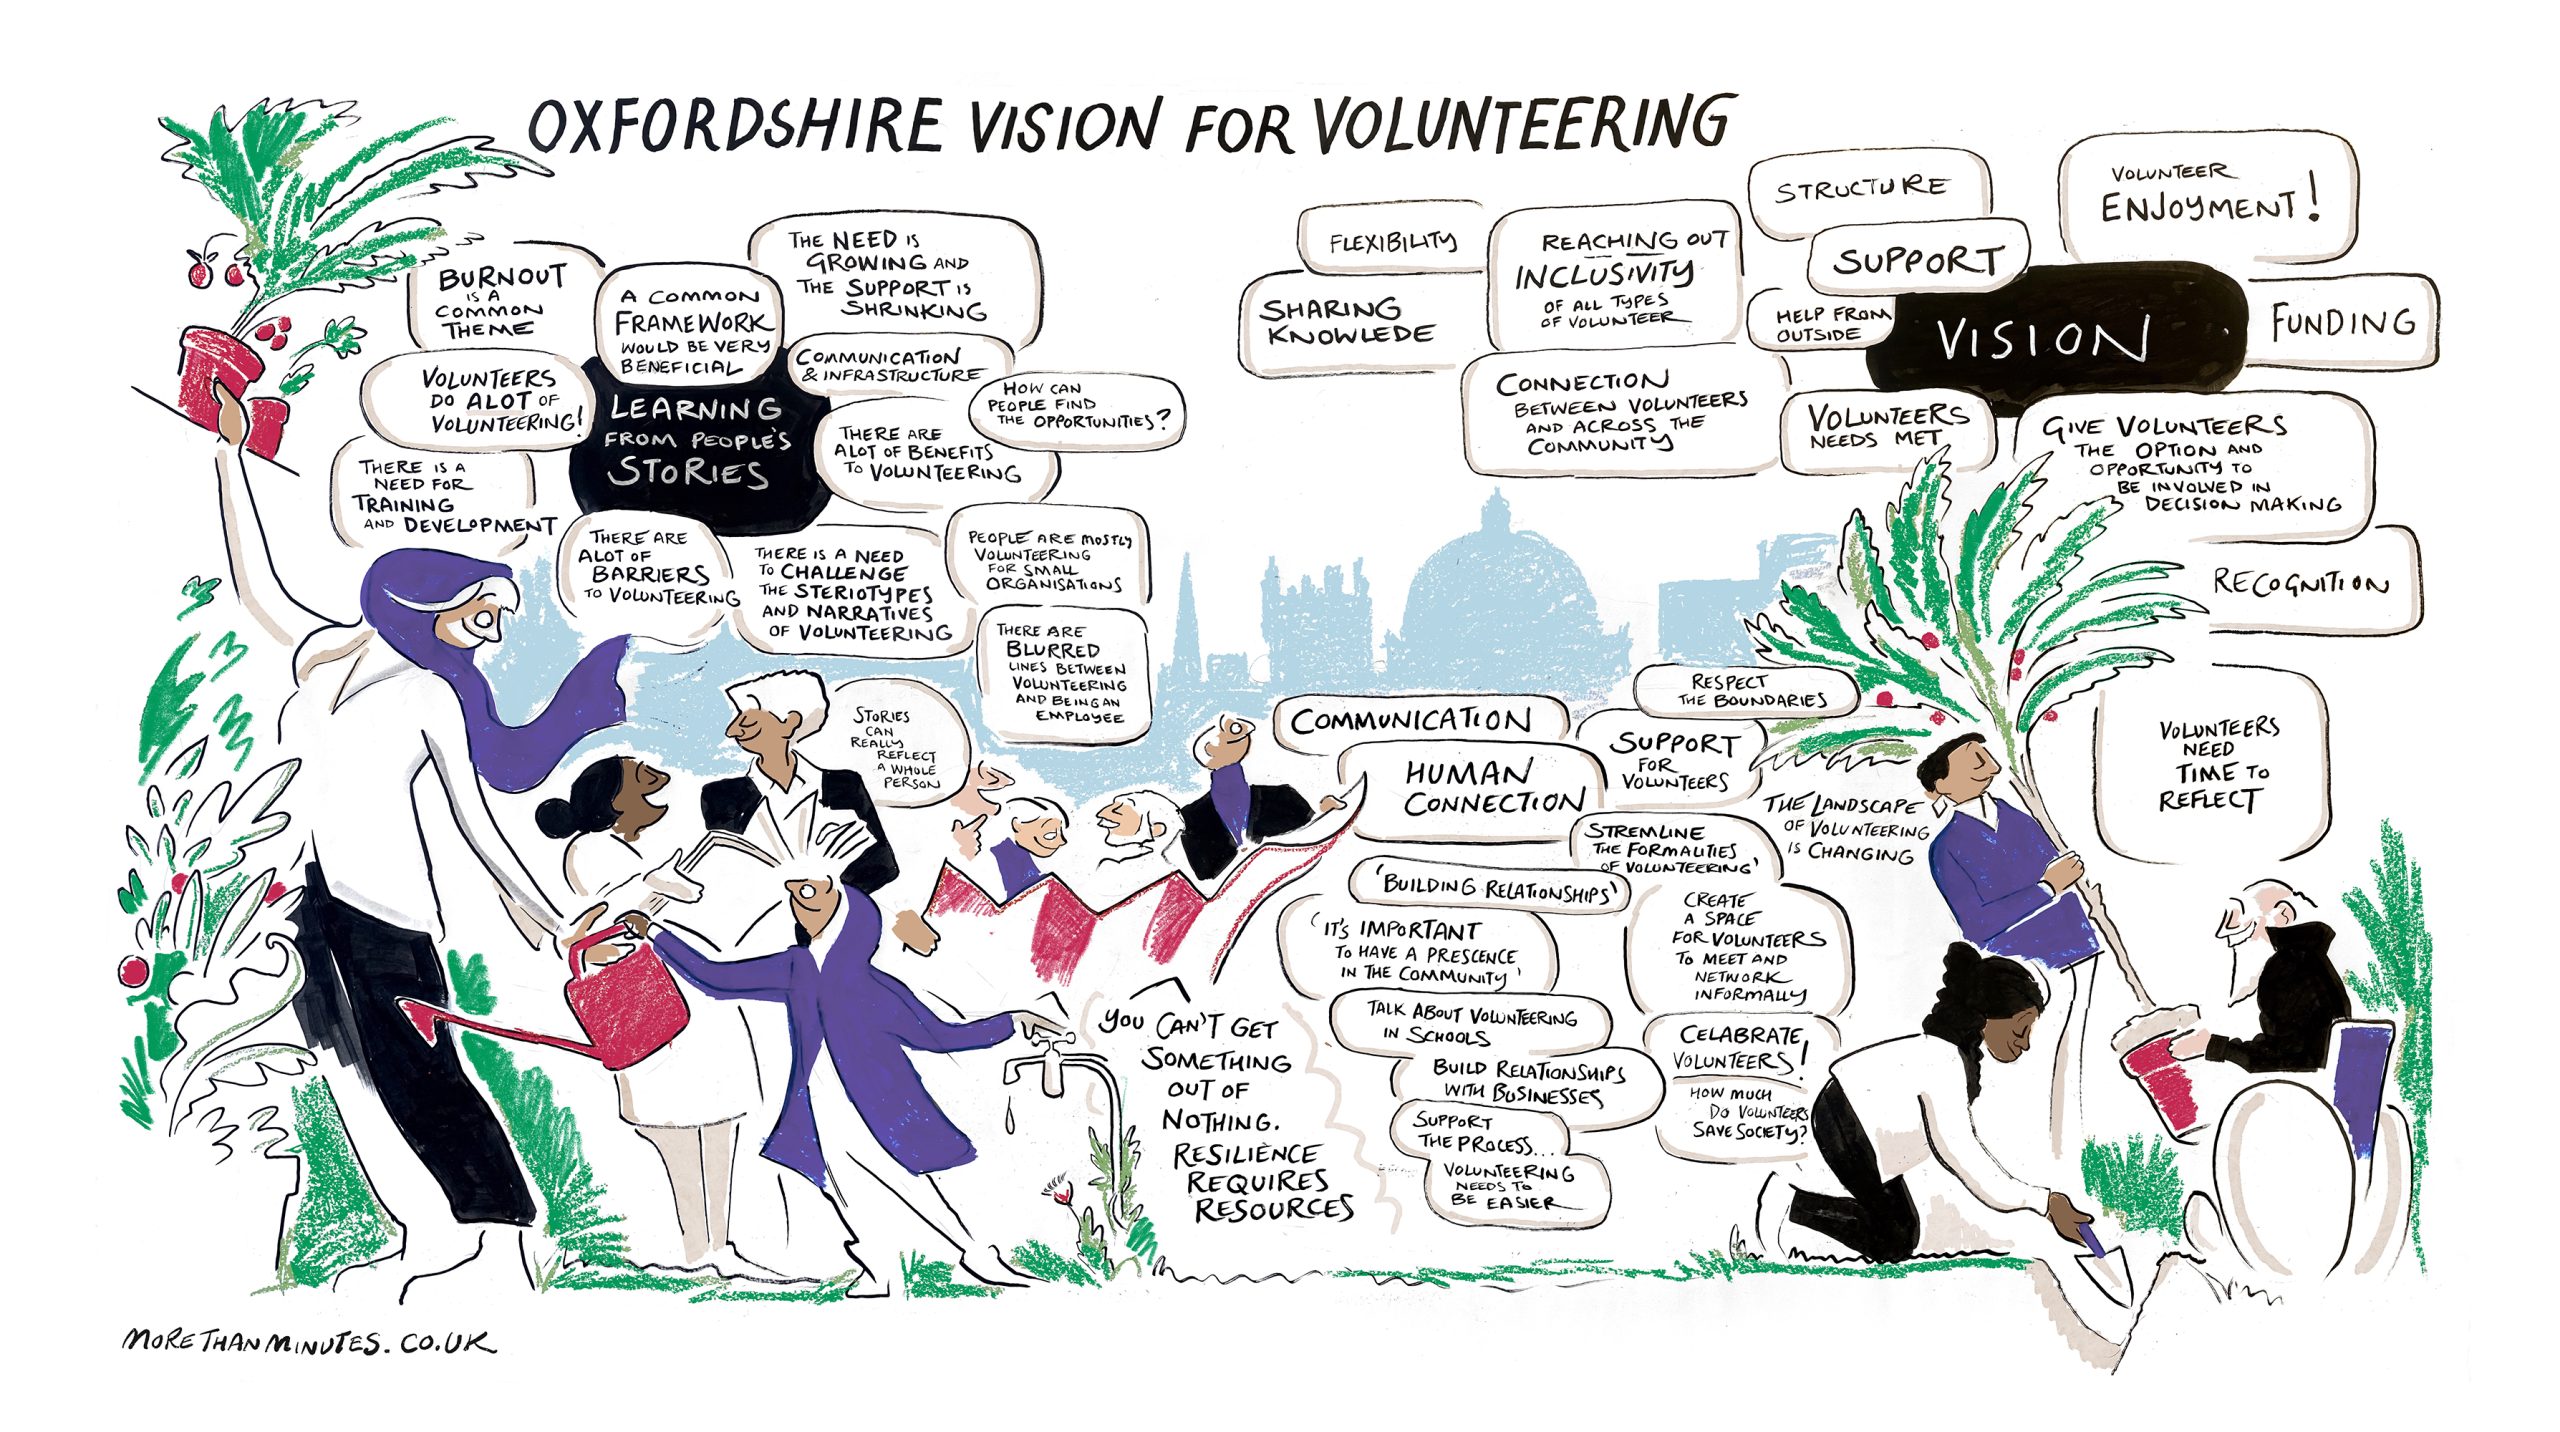 How can we ensure a sustainable and inclusive future for volunteering and community action in Oxfordshire? Ten key principles to support a thriving voluntary sector in our county feature